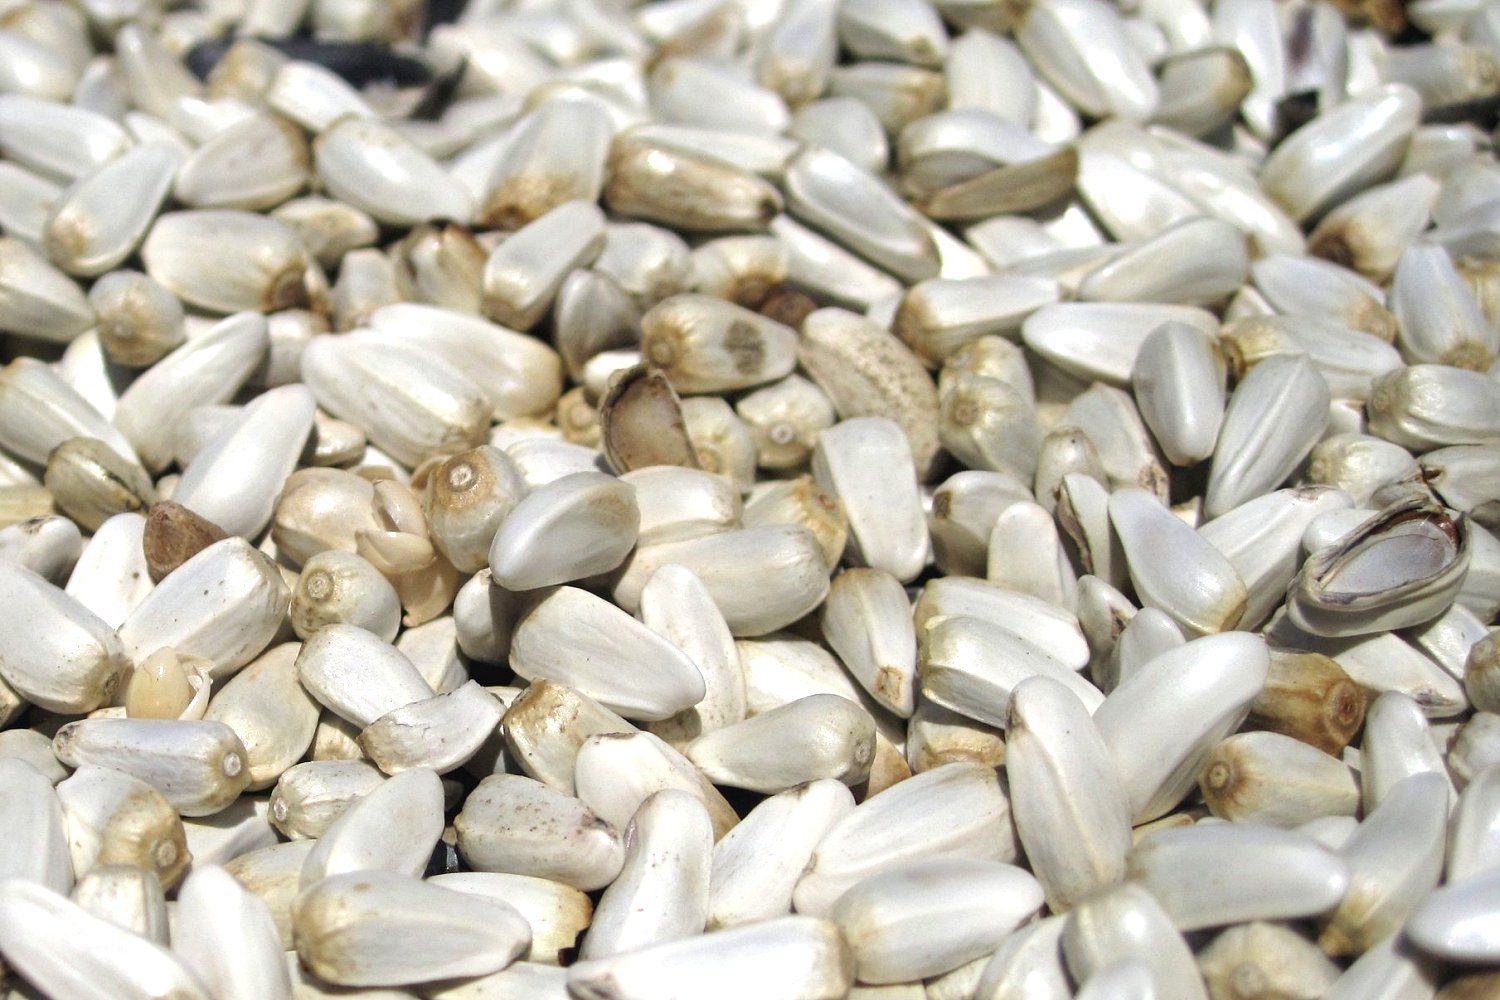 What is Safflower Seed?